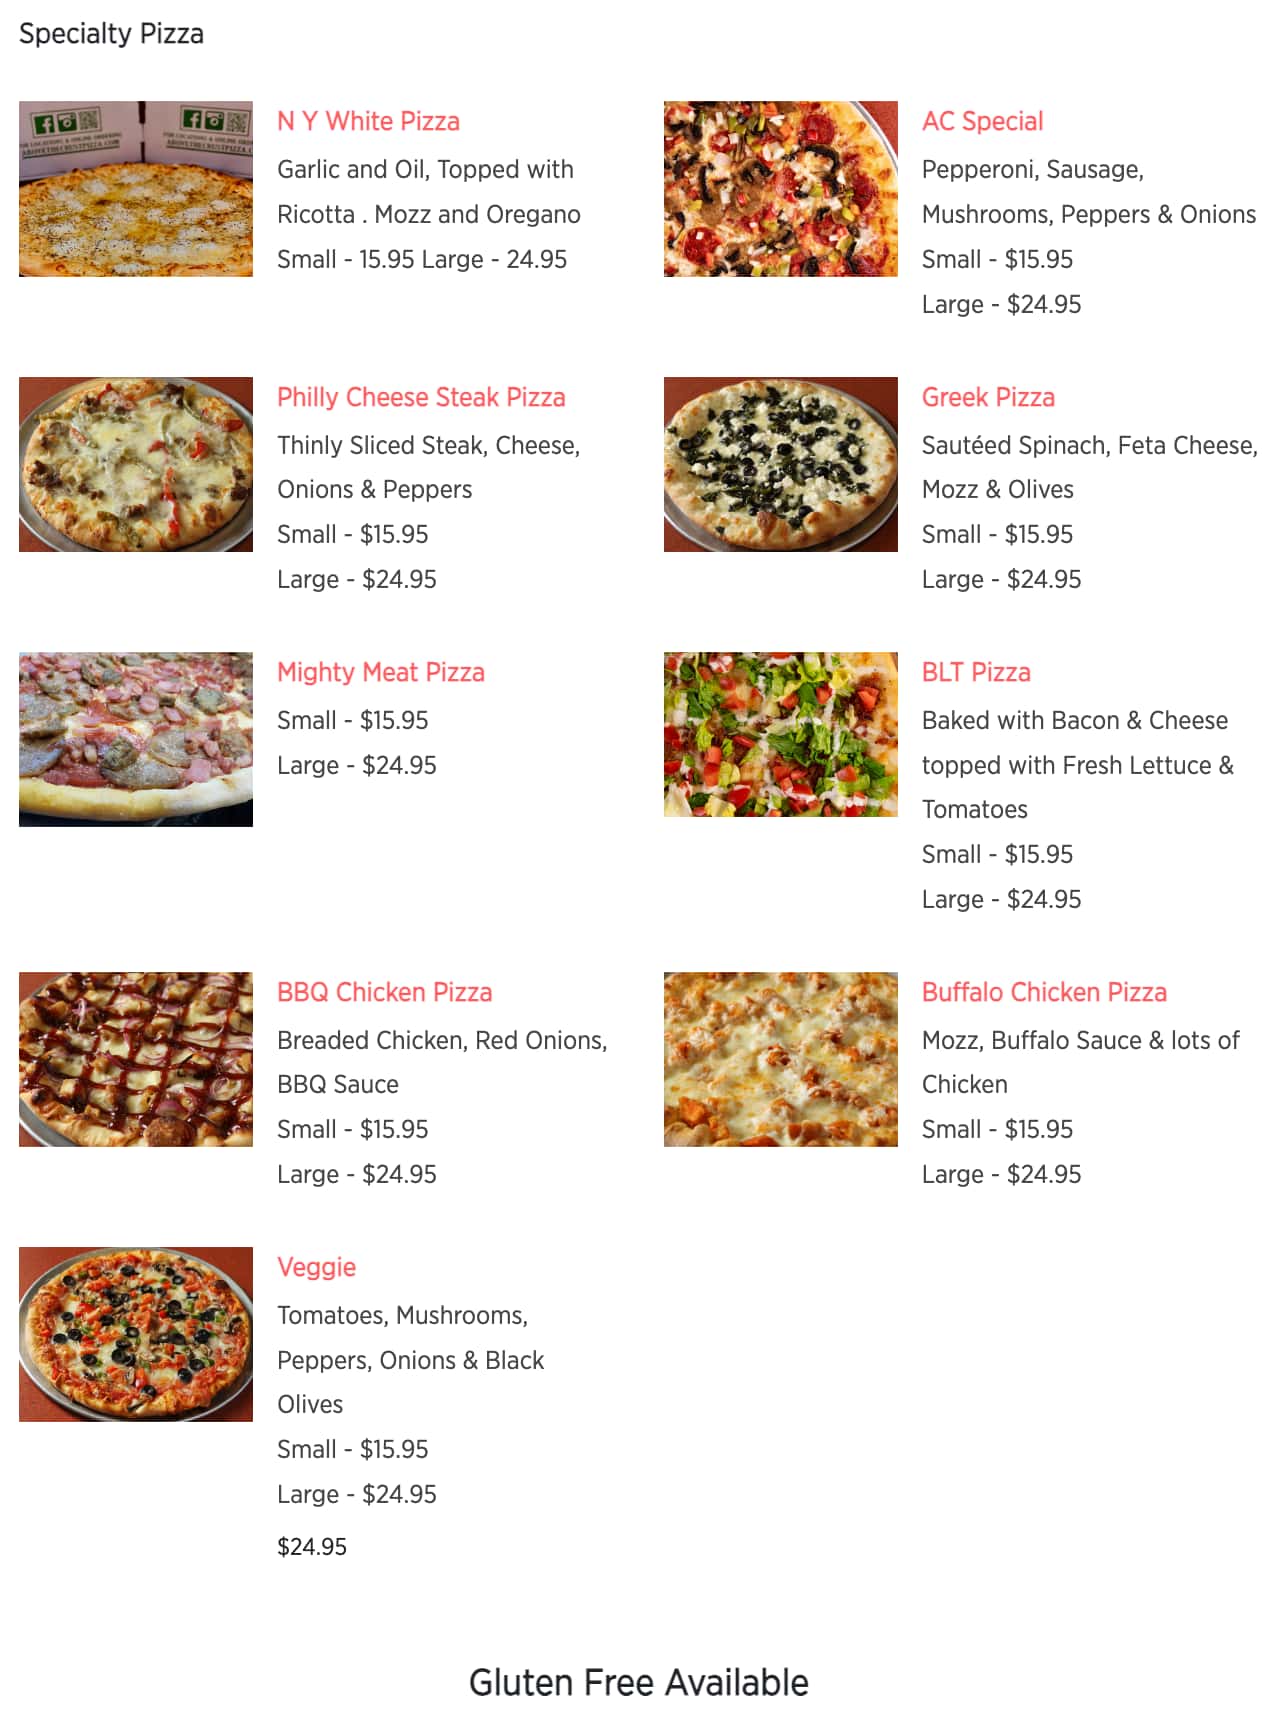 Above The Crust Pizza Specialty Pizza Menu